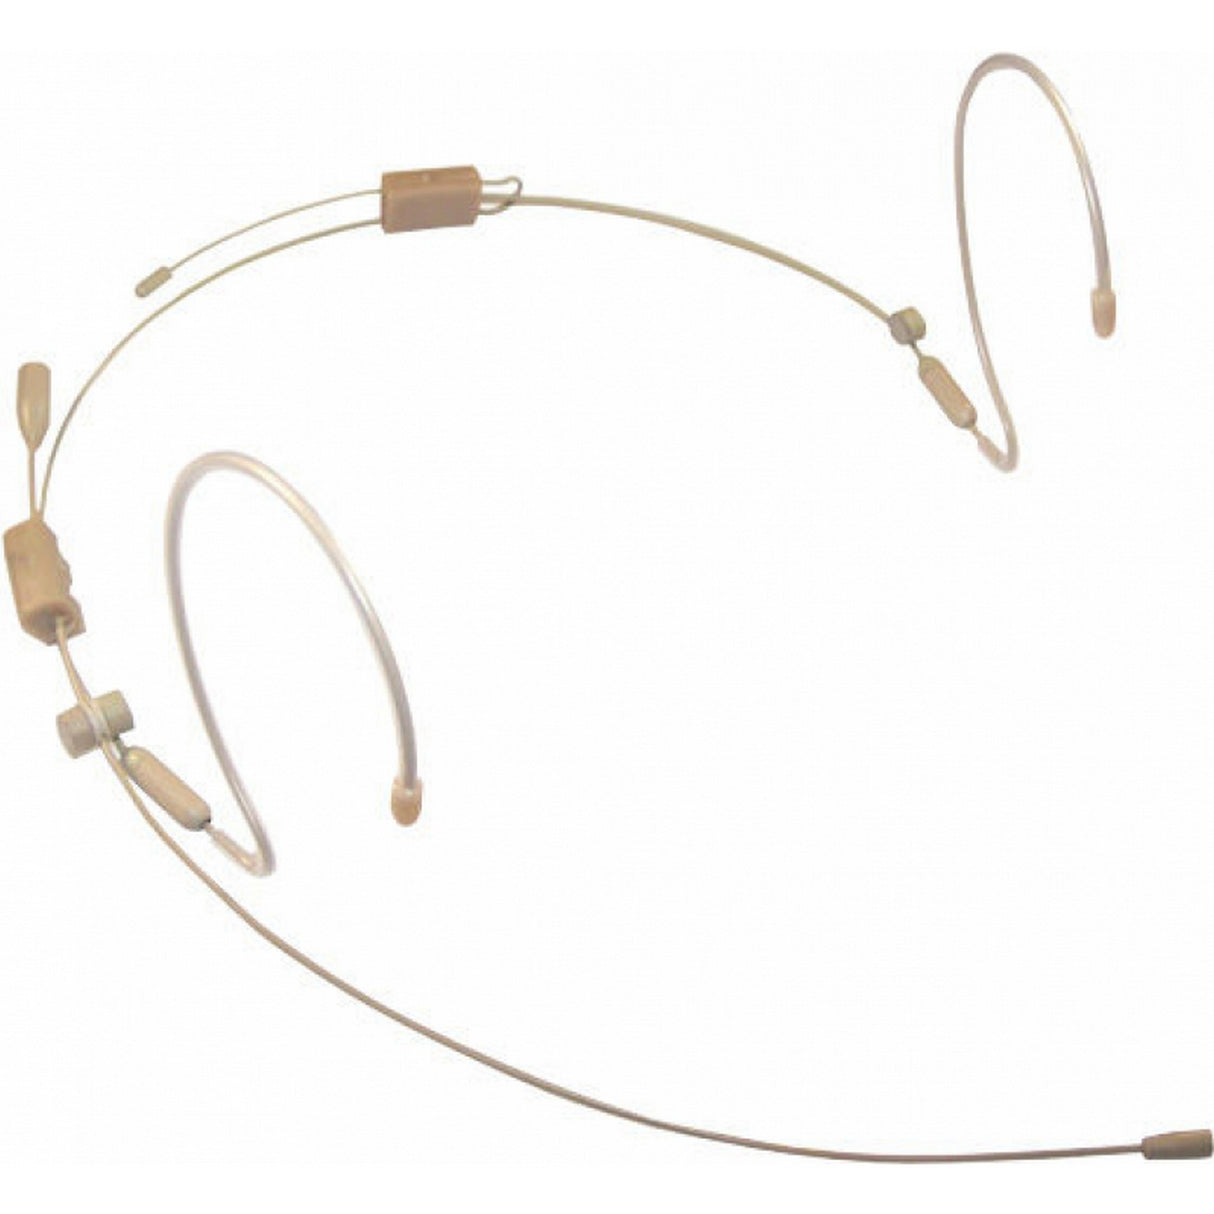 Provider Series PSM1 Omnidirectional Dual-Ear Headworn Microphone with 3.5mm for Sennheiser, Tan